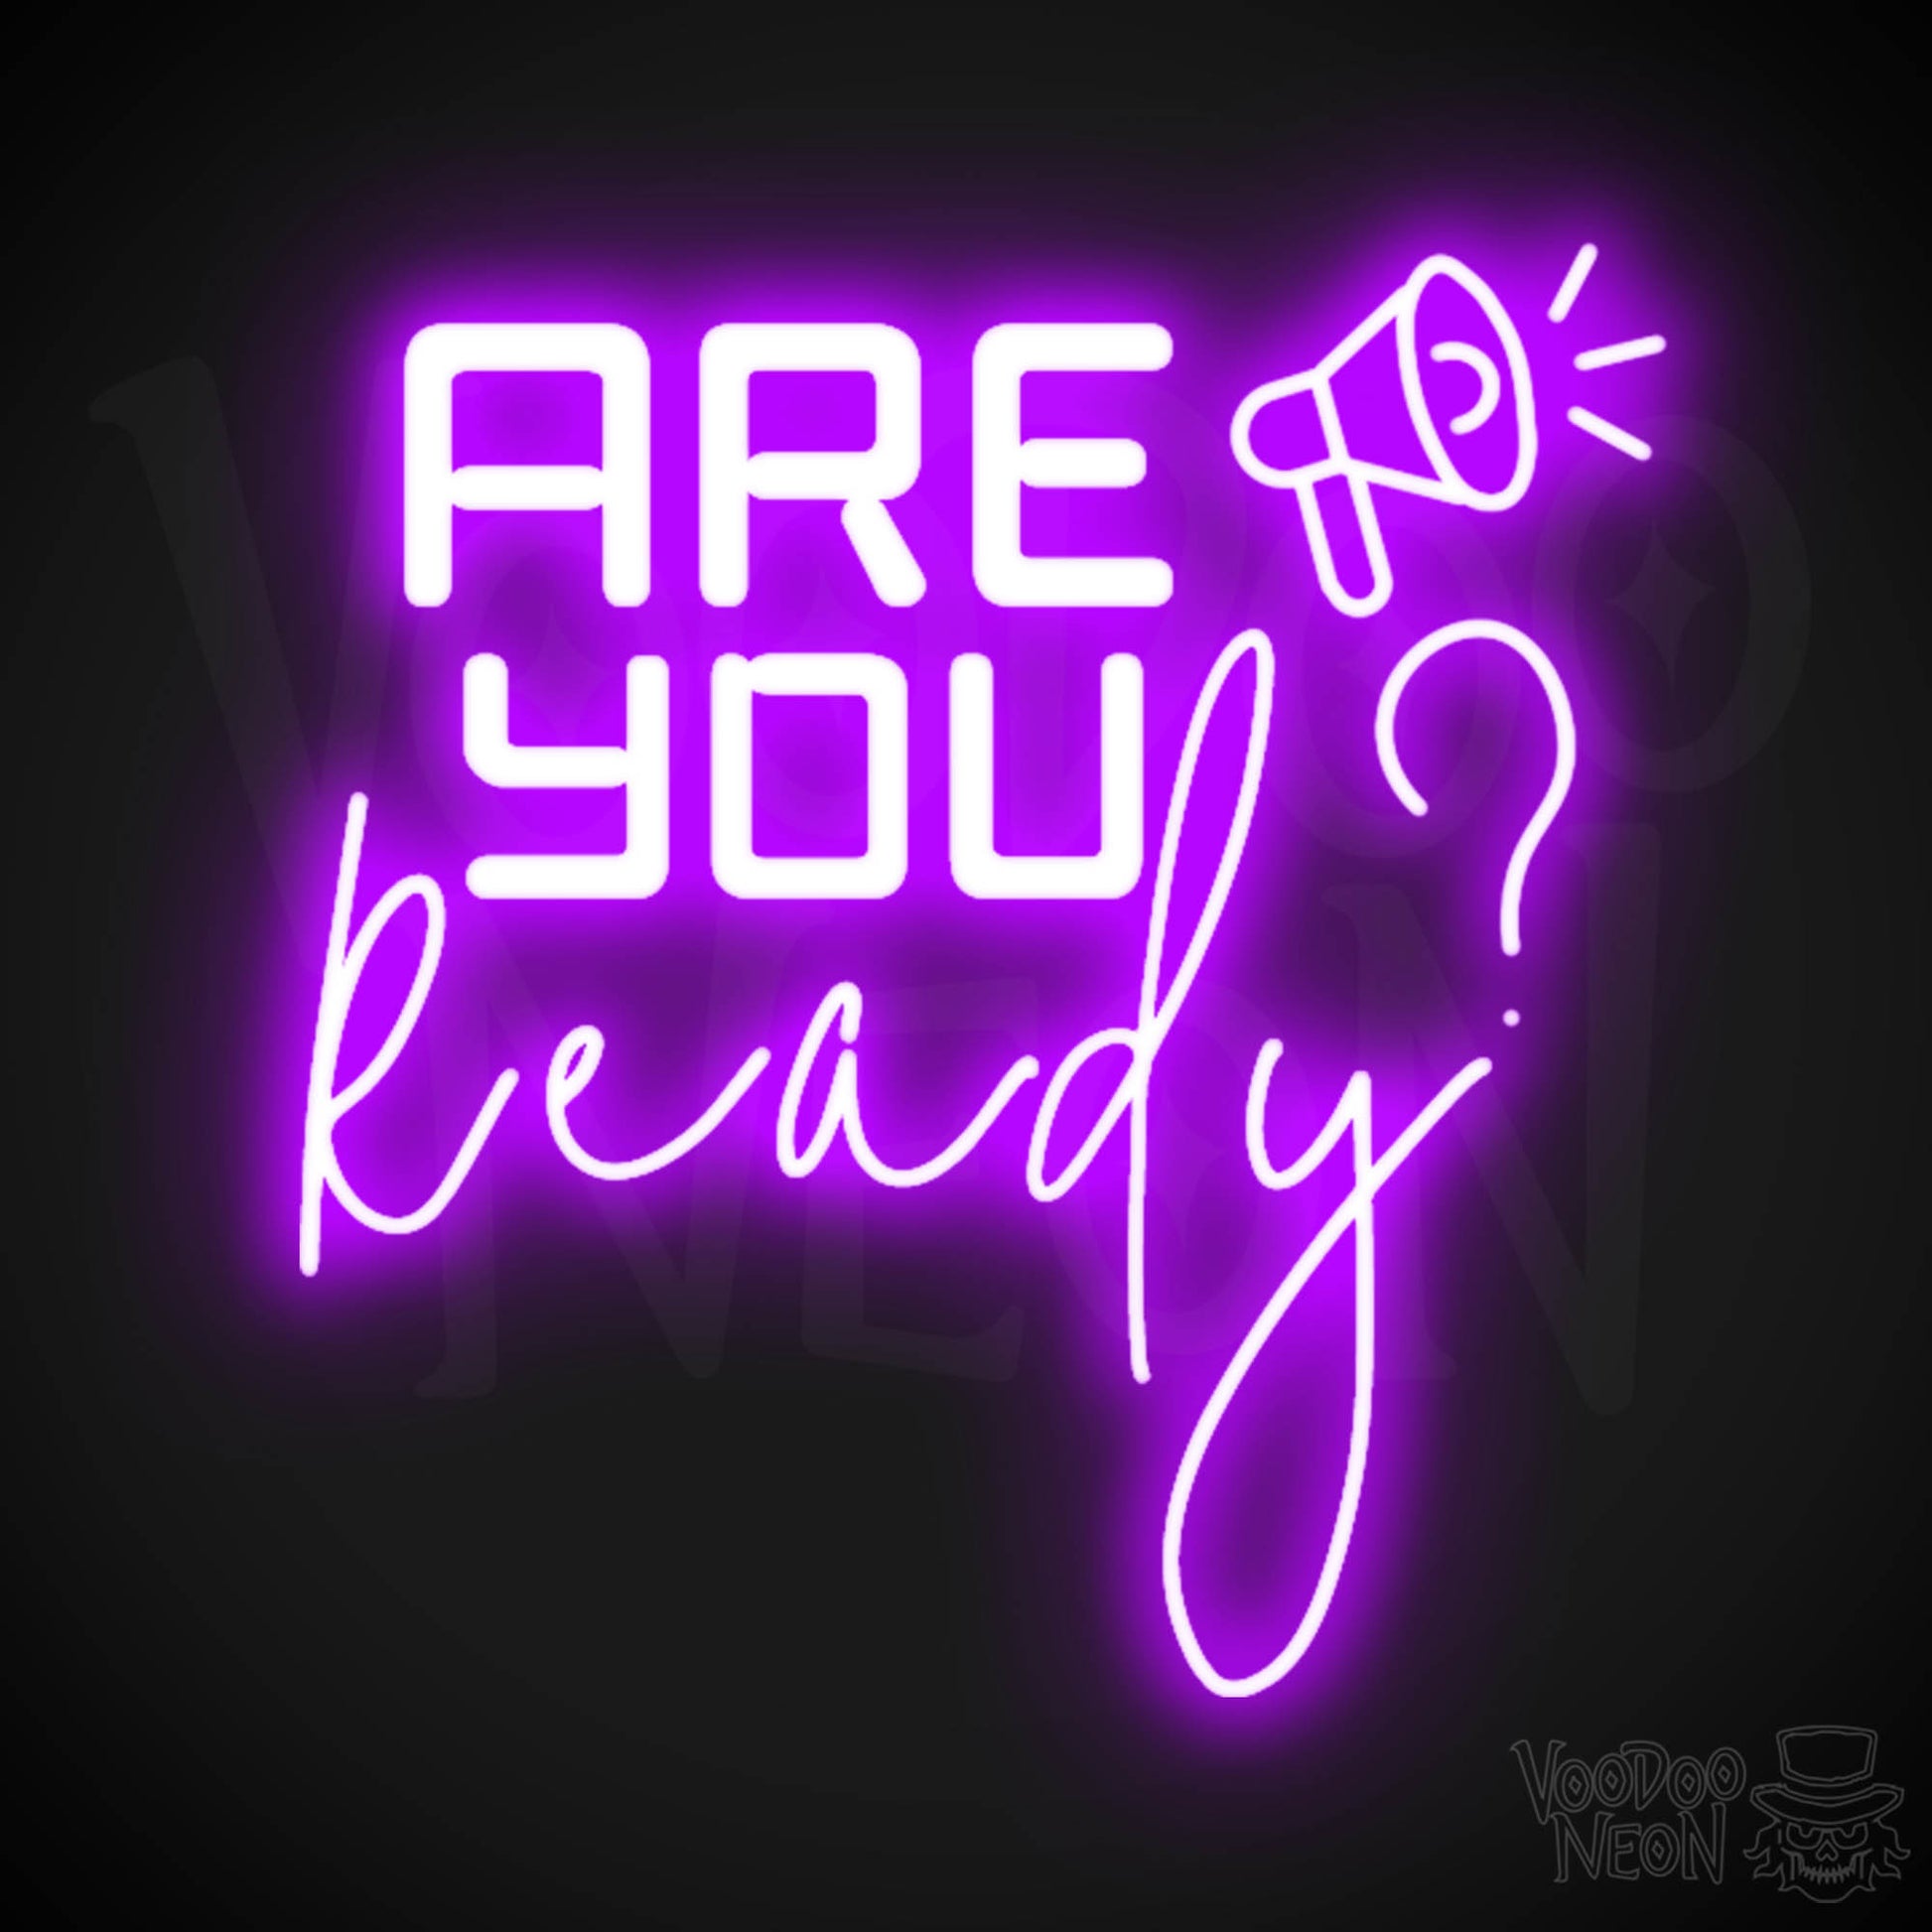 Are You Ready Neon Sign - Neon Are You Ready Sign - LED Wall Art - Color Purple